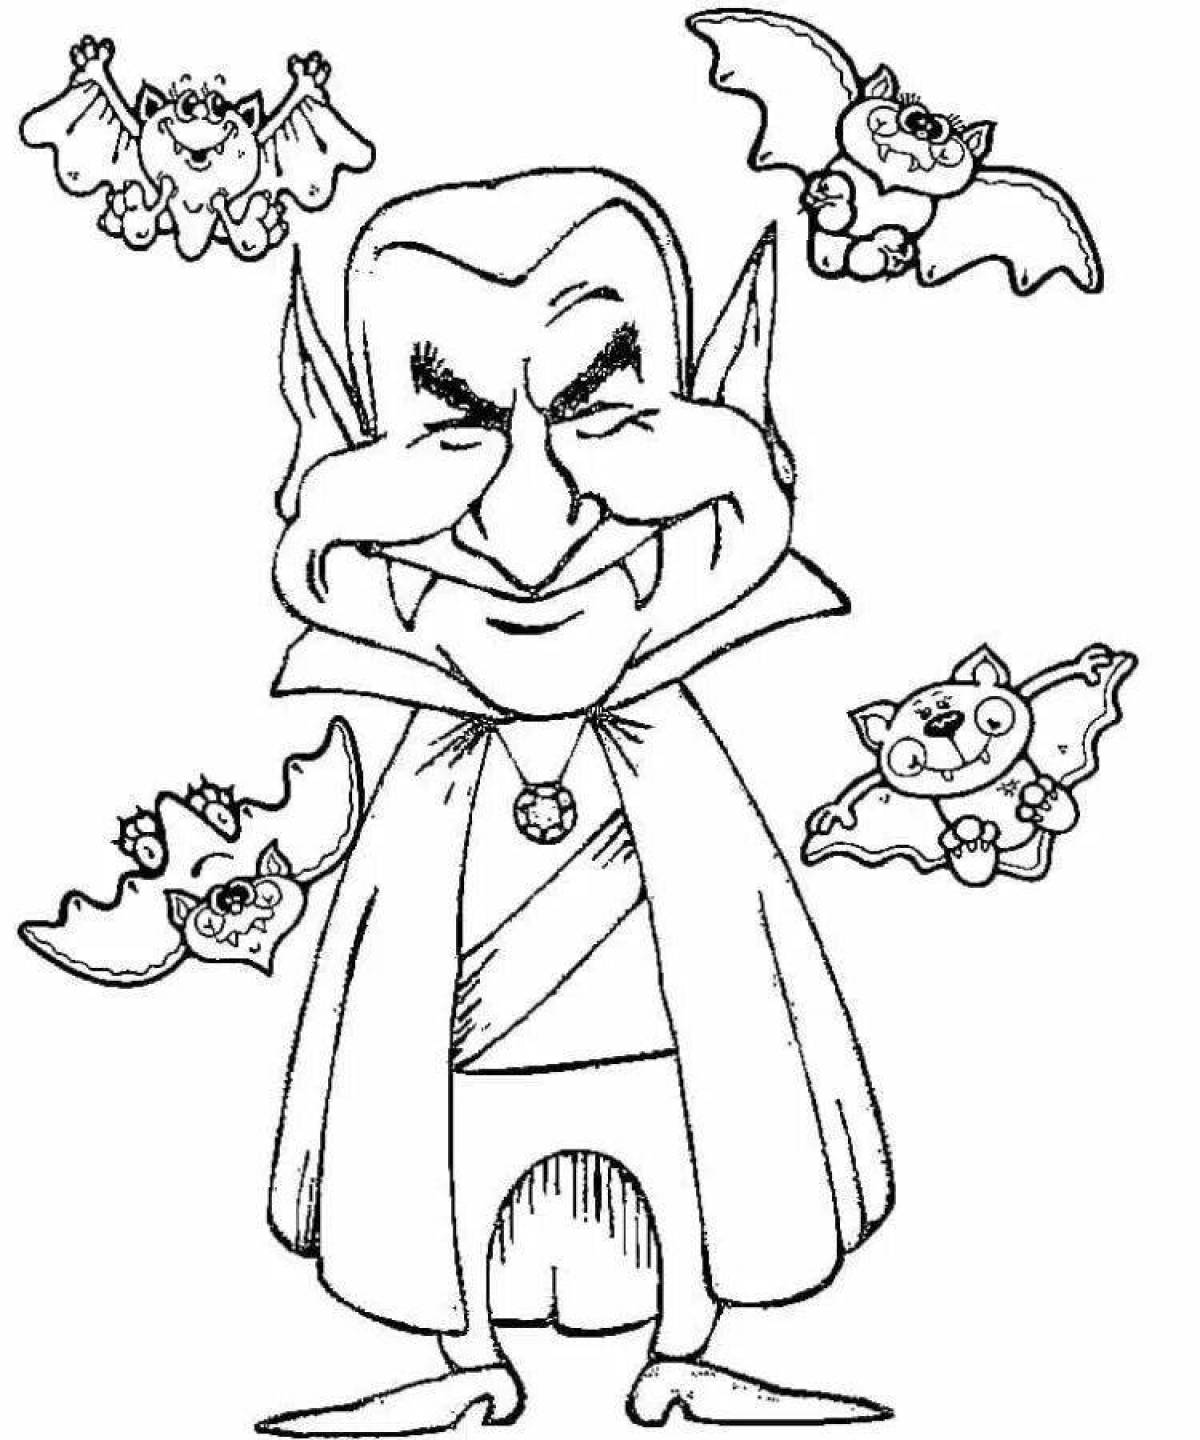 Unwanted villain coloring pages